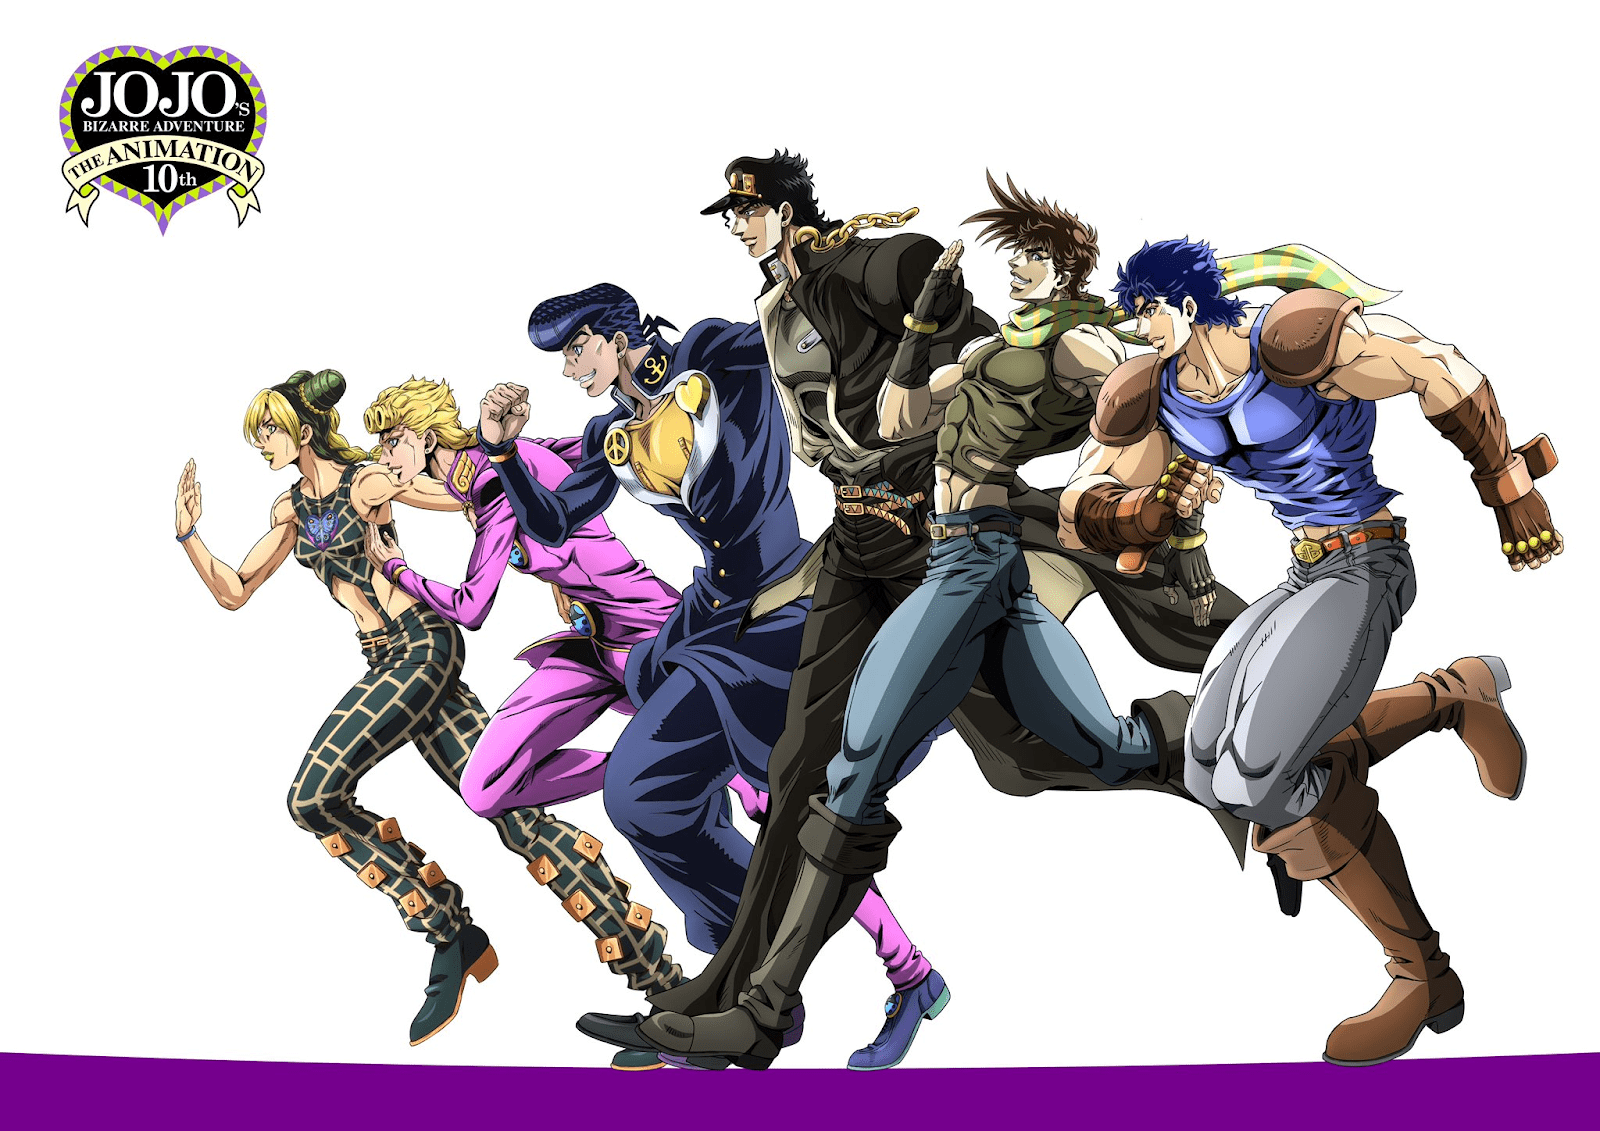 Create your dream matches with JOJO'S BIZARRE ADVENTURE: ALL-STAR BATTLE R,  available today! | Bandai Namco Europe